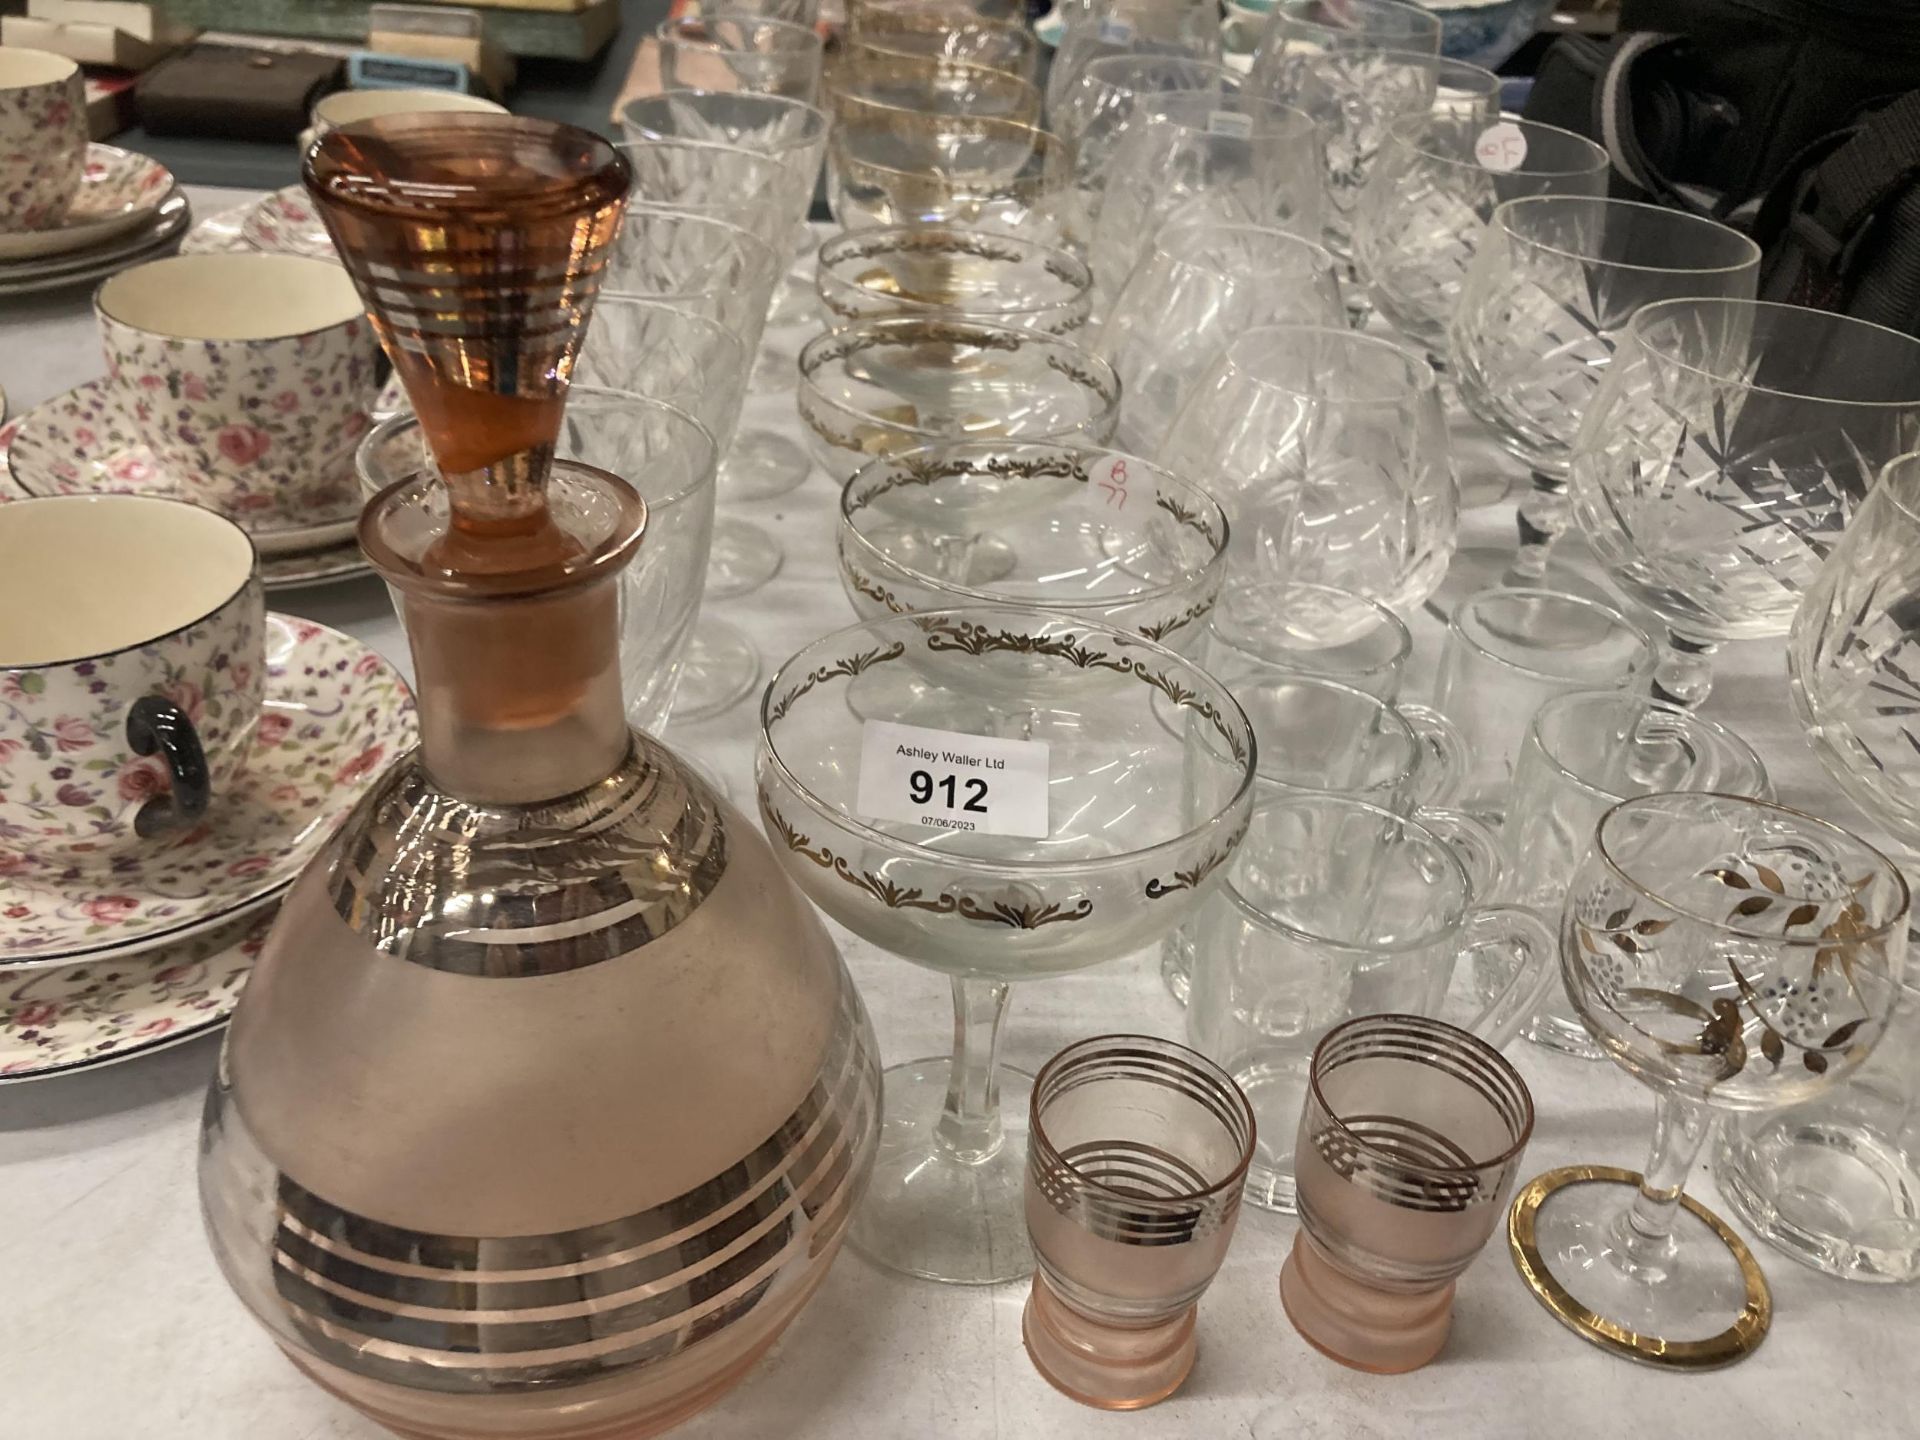 A LARGE QUANTITY OF GLASSES TO INCLUDE COCKTAIL, CHAMPAGNE FLUTES, WINE, BRANDY, A SMALL DECANTER - Image 2 of 2